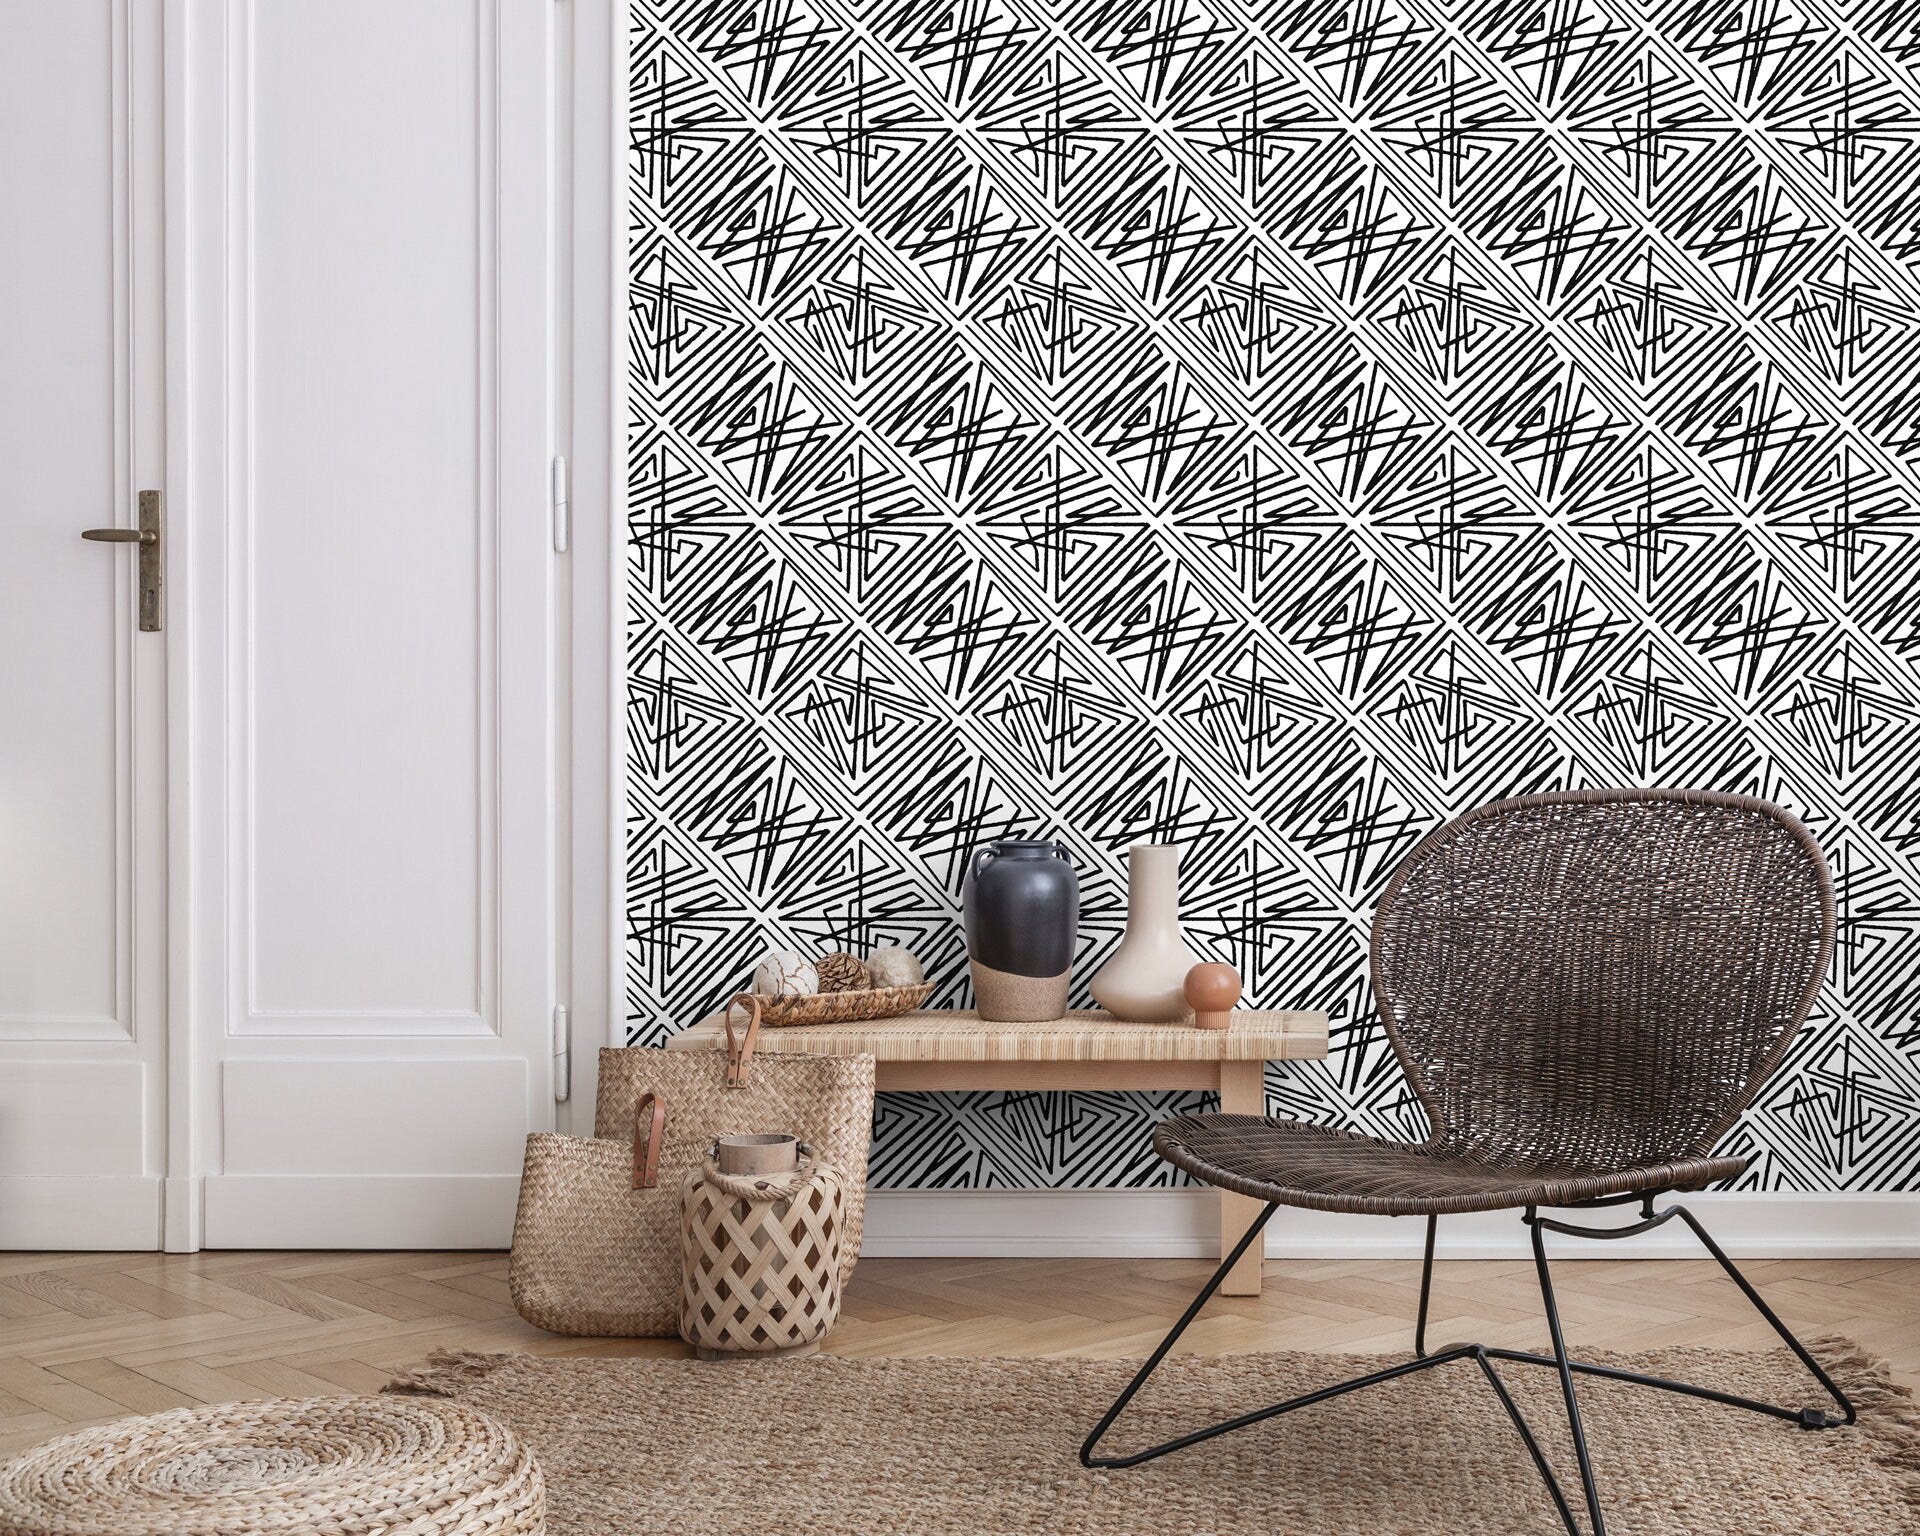 Wallpaper Peel and Stick Wallpaper Removable Wallpaper Home Decor Wall Art Wall Decor Room Decor / Modern Black and White Wallpaper - C547